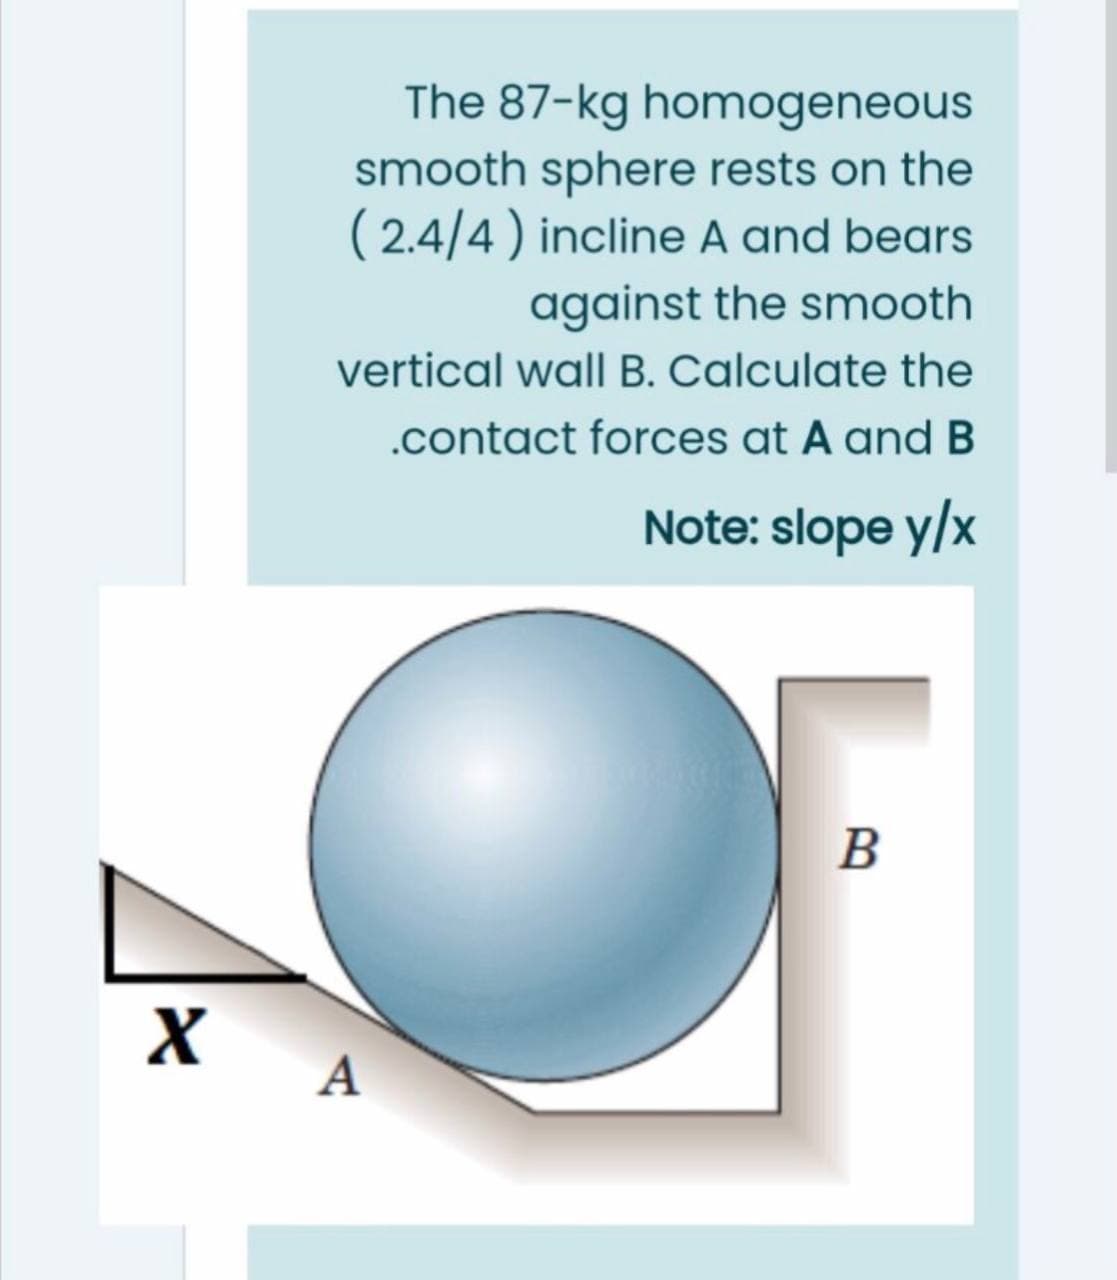 The 87-kg homogeneous
smooth sphere rests on the
( 2.4/4) incline A and bears
against the smooth
vertical wall B. Calculate the
.contact forces at A and B
Note: slope y/x
B
A
